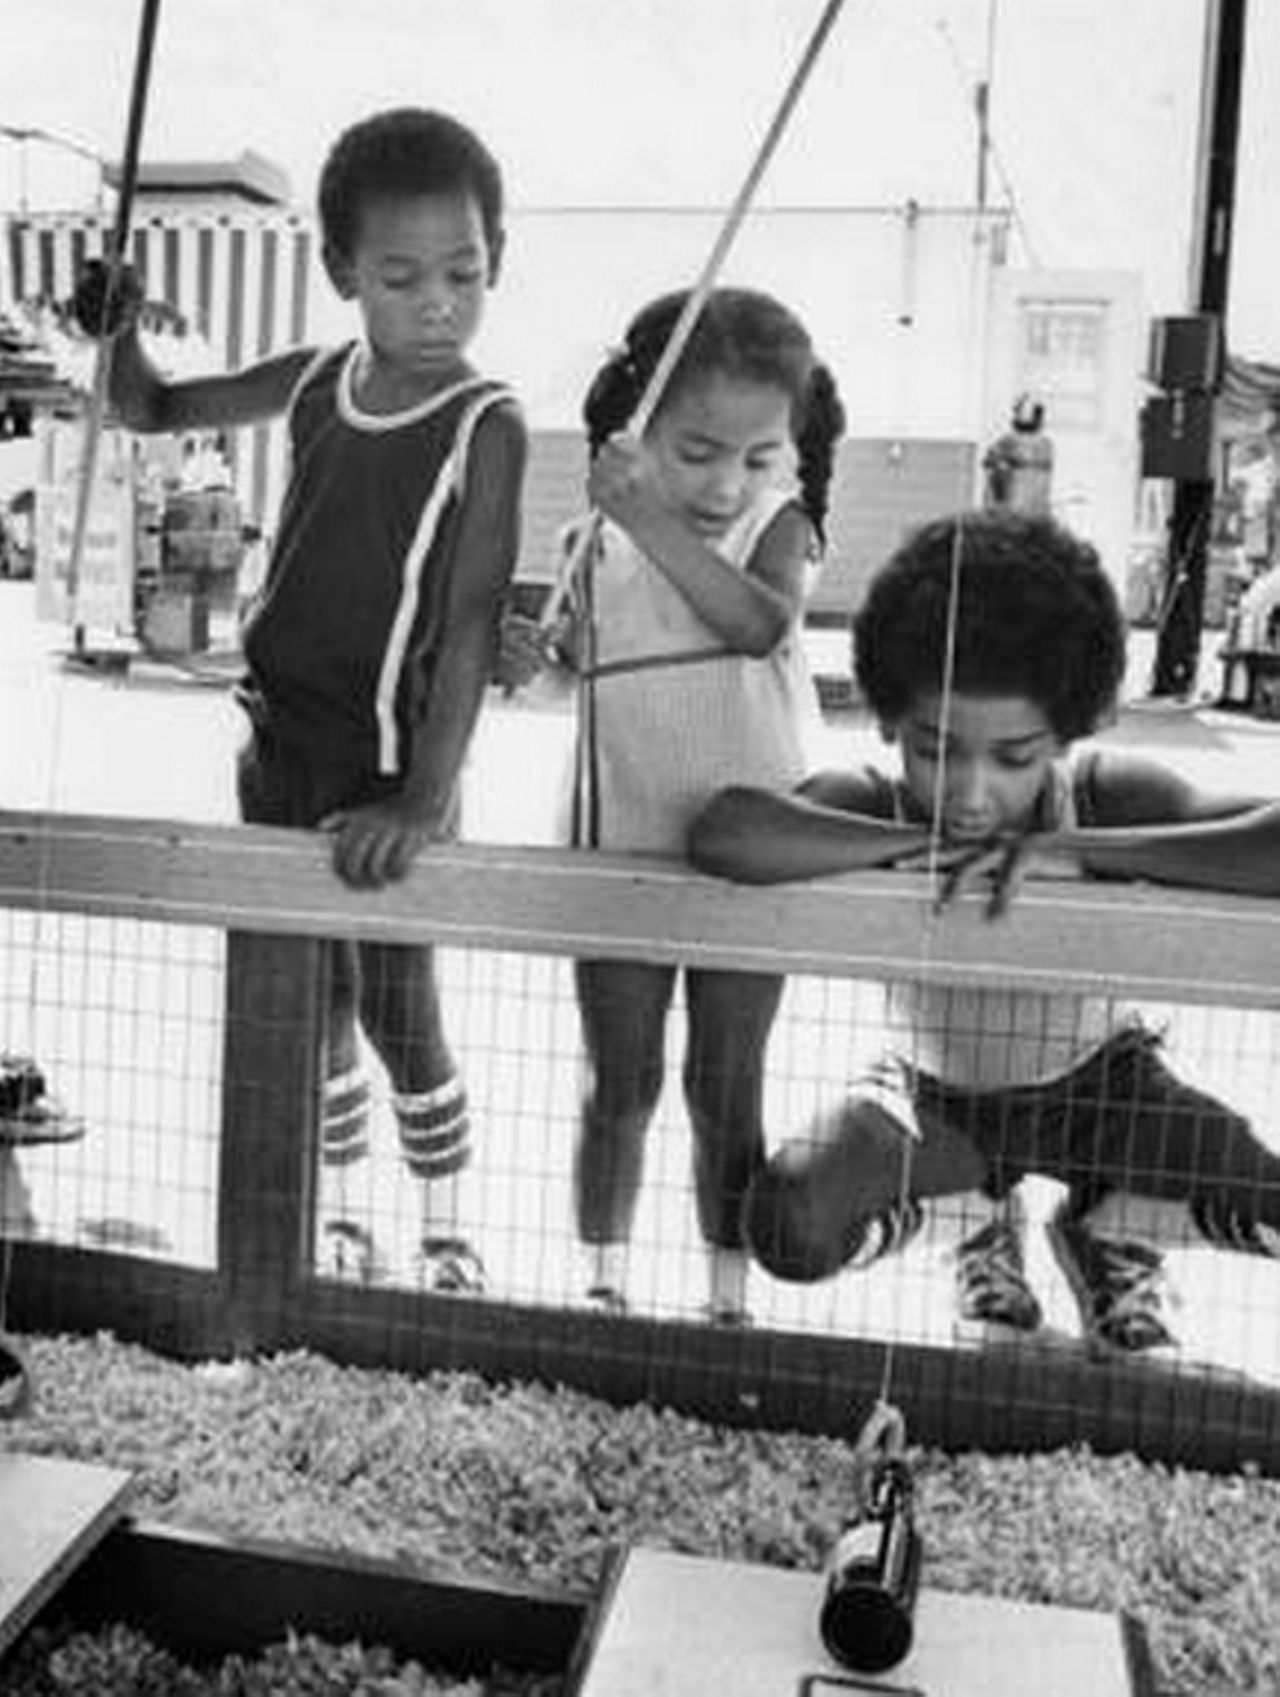 Playing a game at the Cuyahoga County fair, 1979.